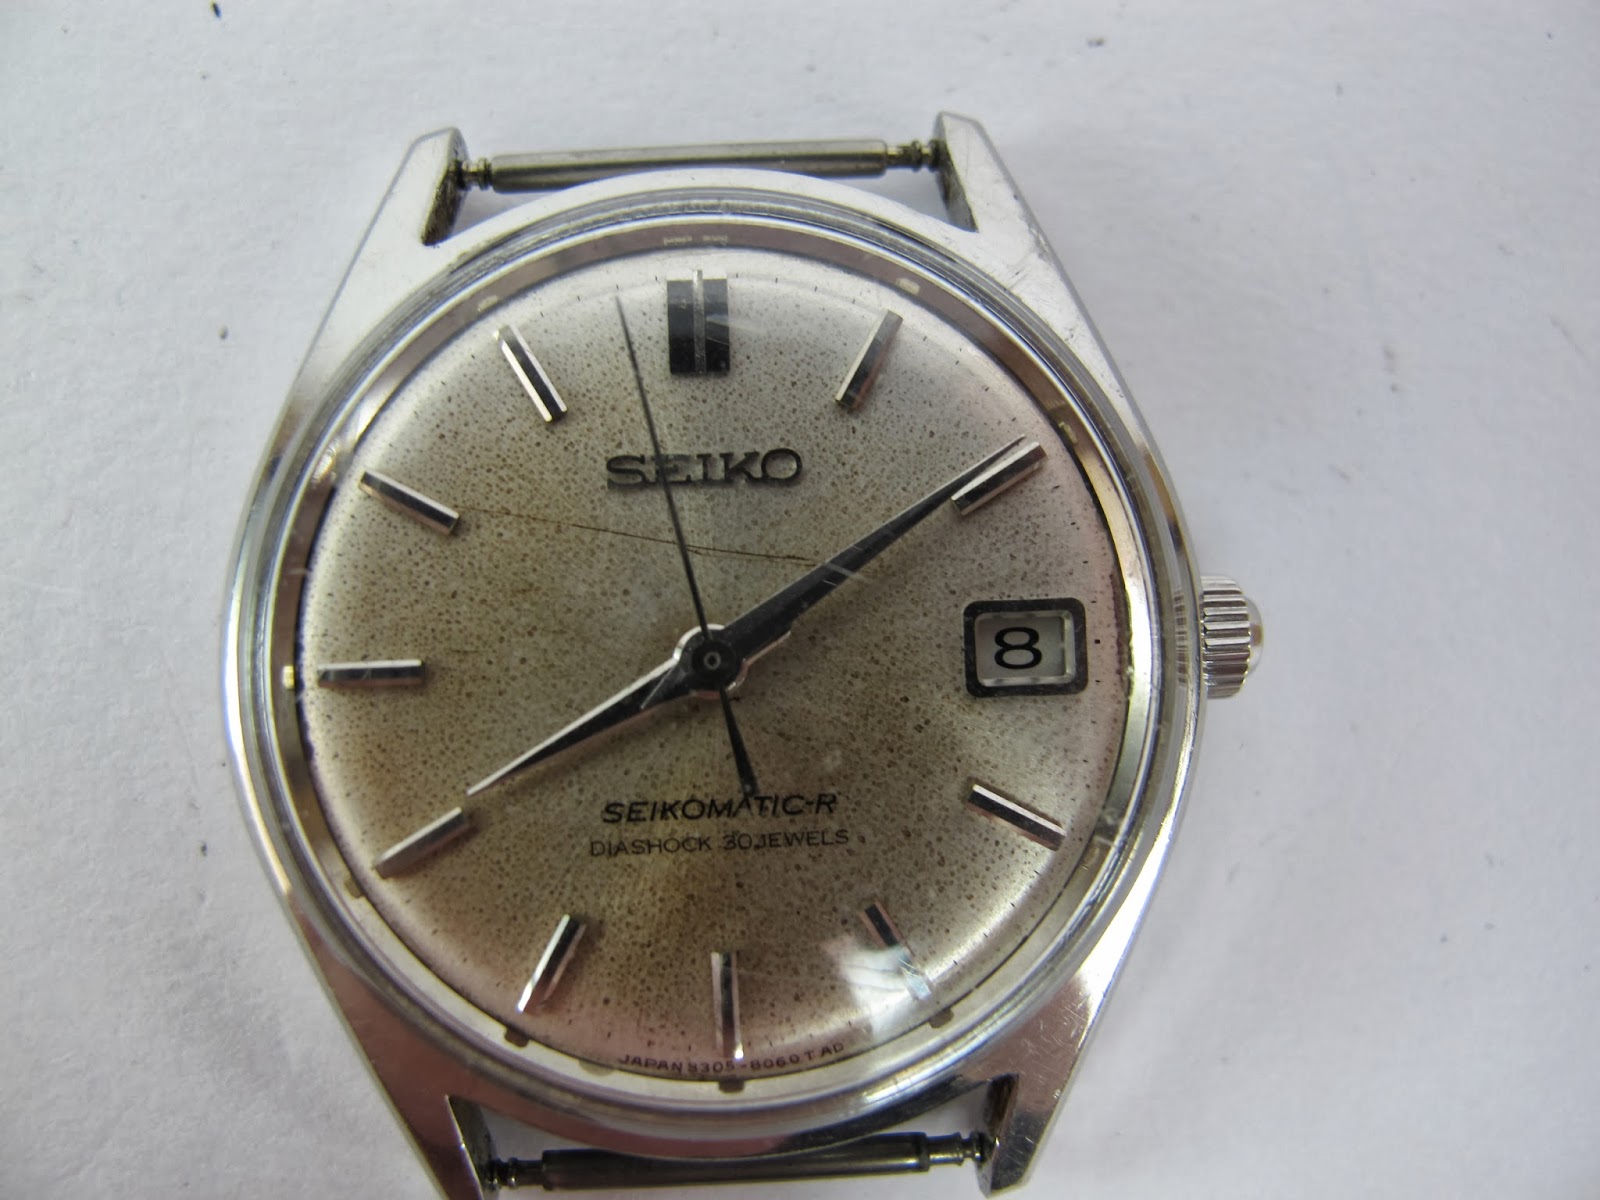 watchopenia: Seikomatic-R 8305-8010: I need a new face.... for the new year!